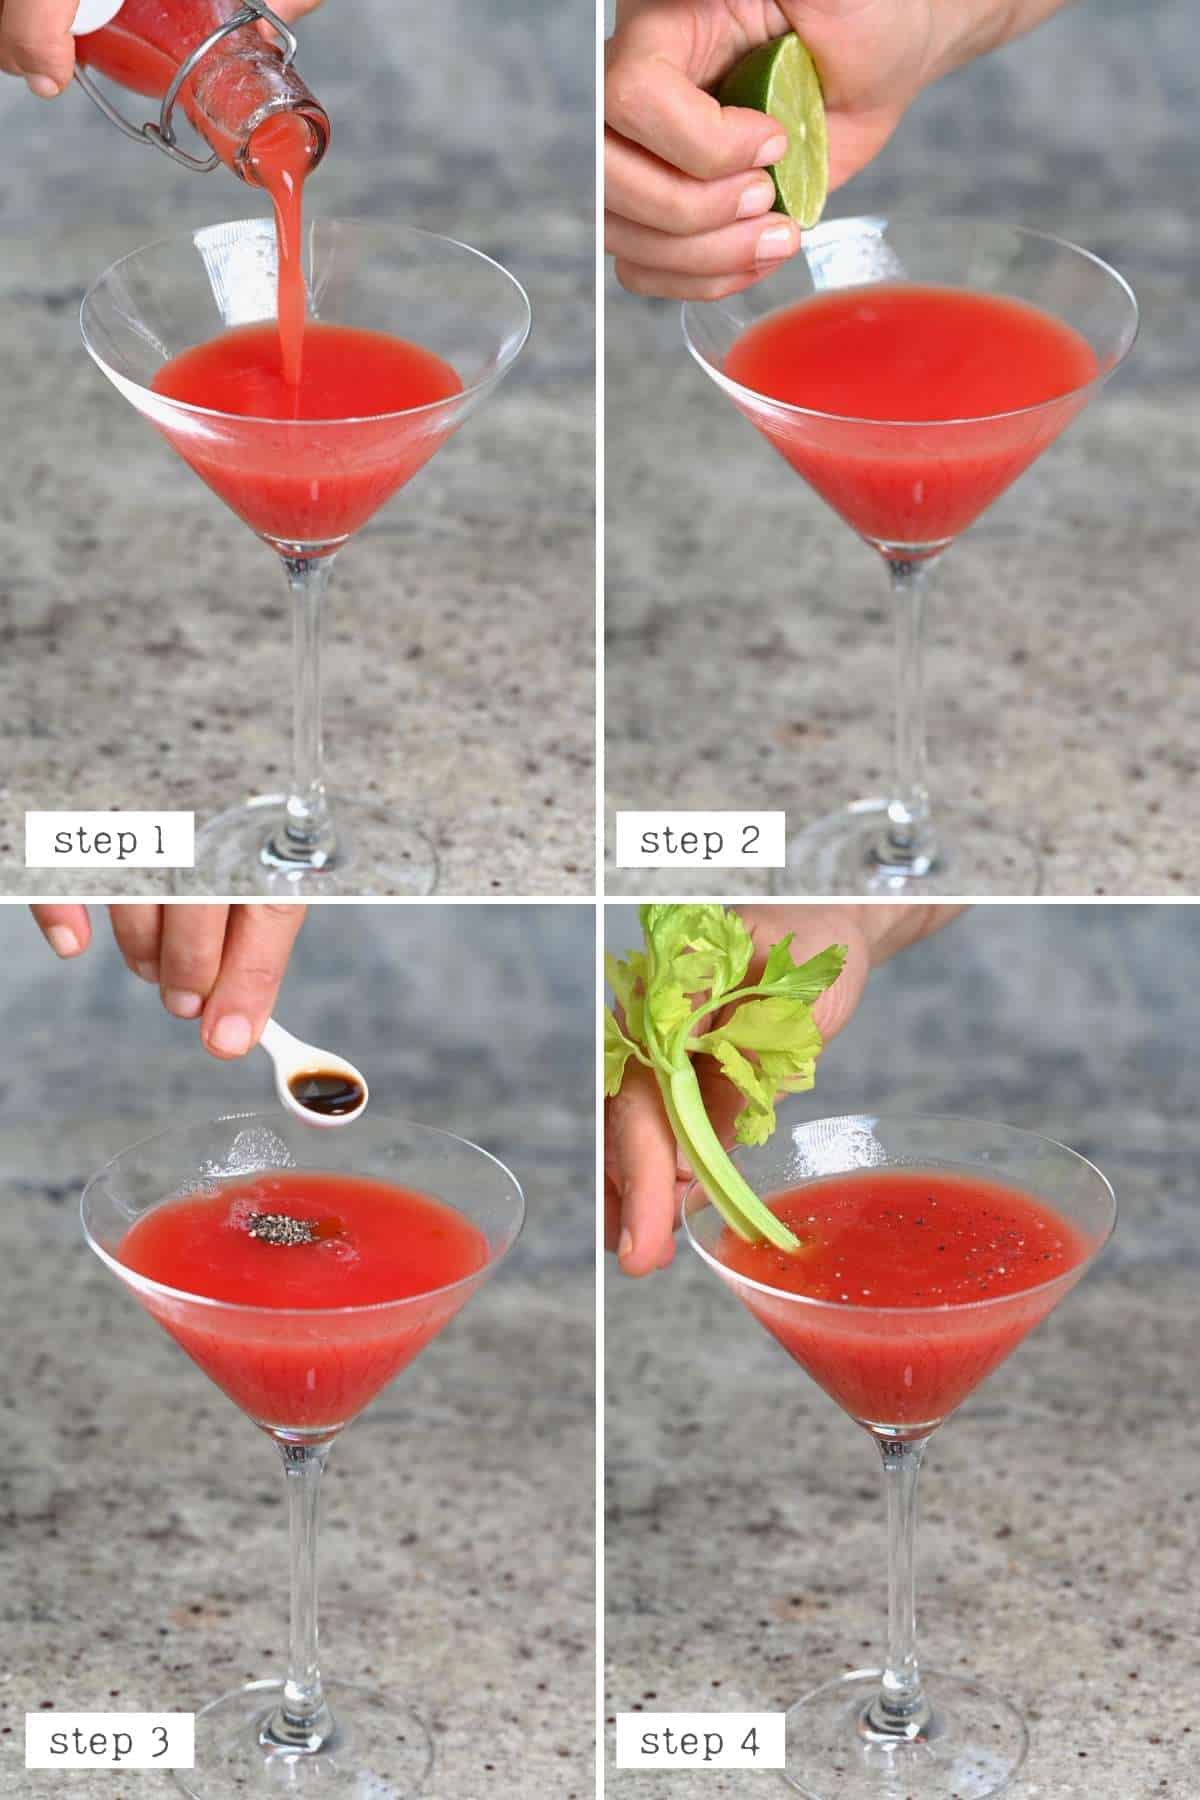 The steps for making a bloody mary